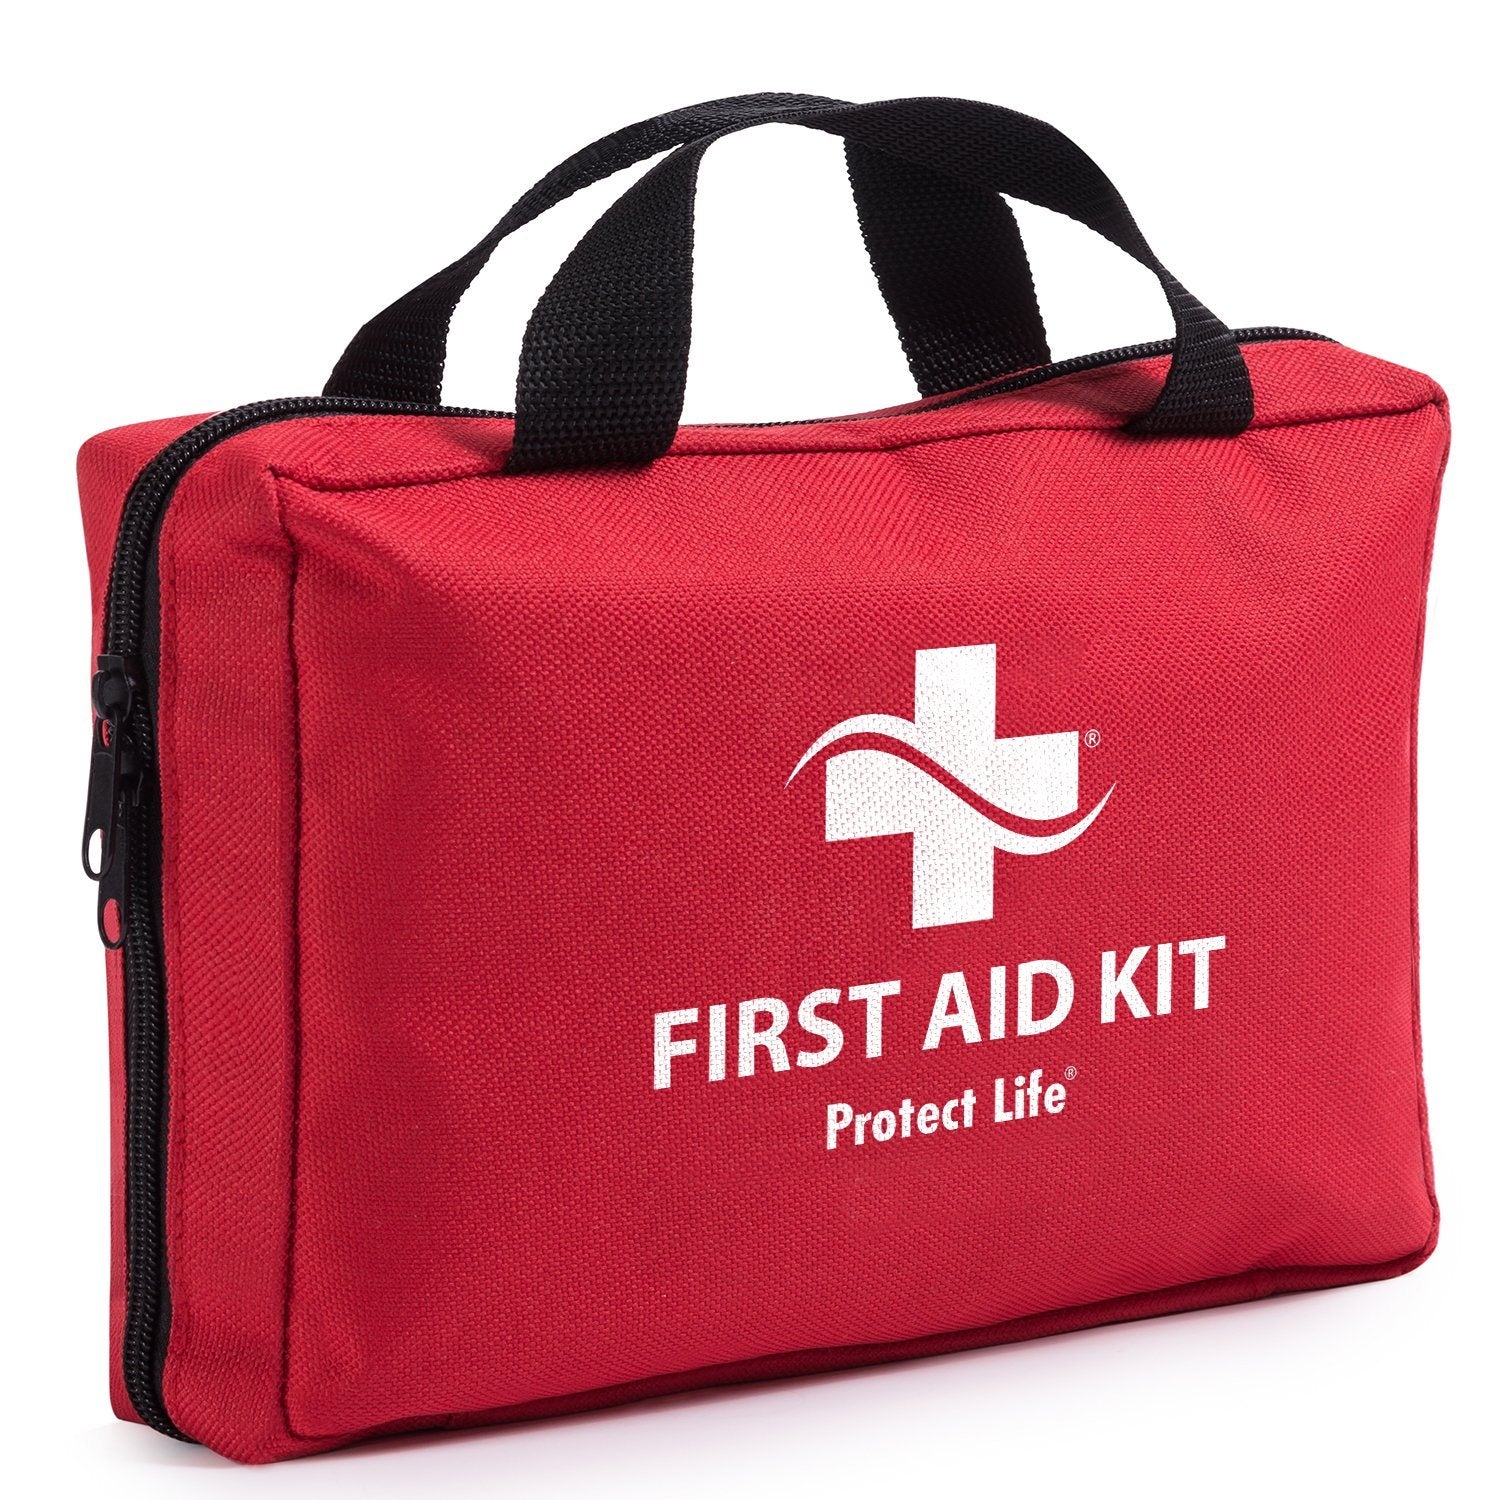 First Aid Kit - 200 Piece - for Car, Home, Outdoors, Sports, Camping,  Hiking or Office